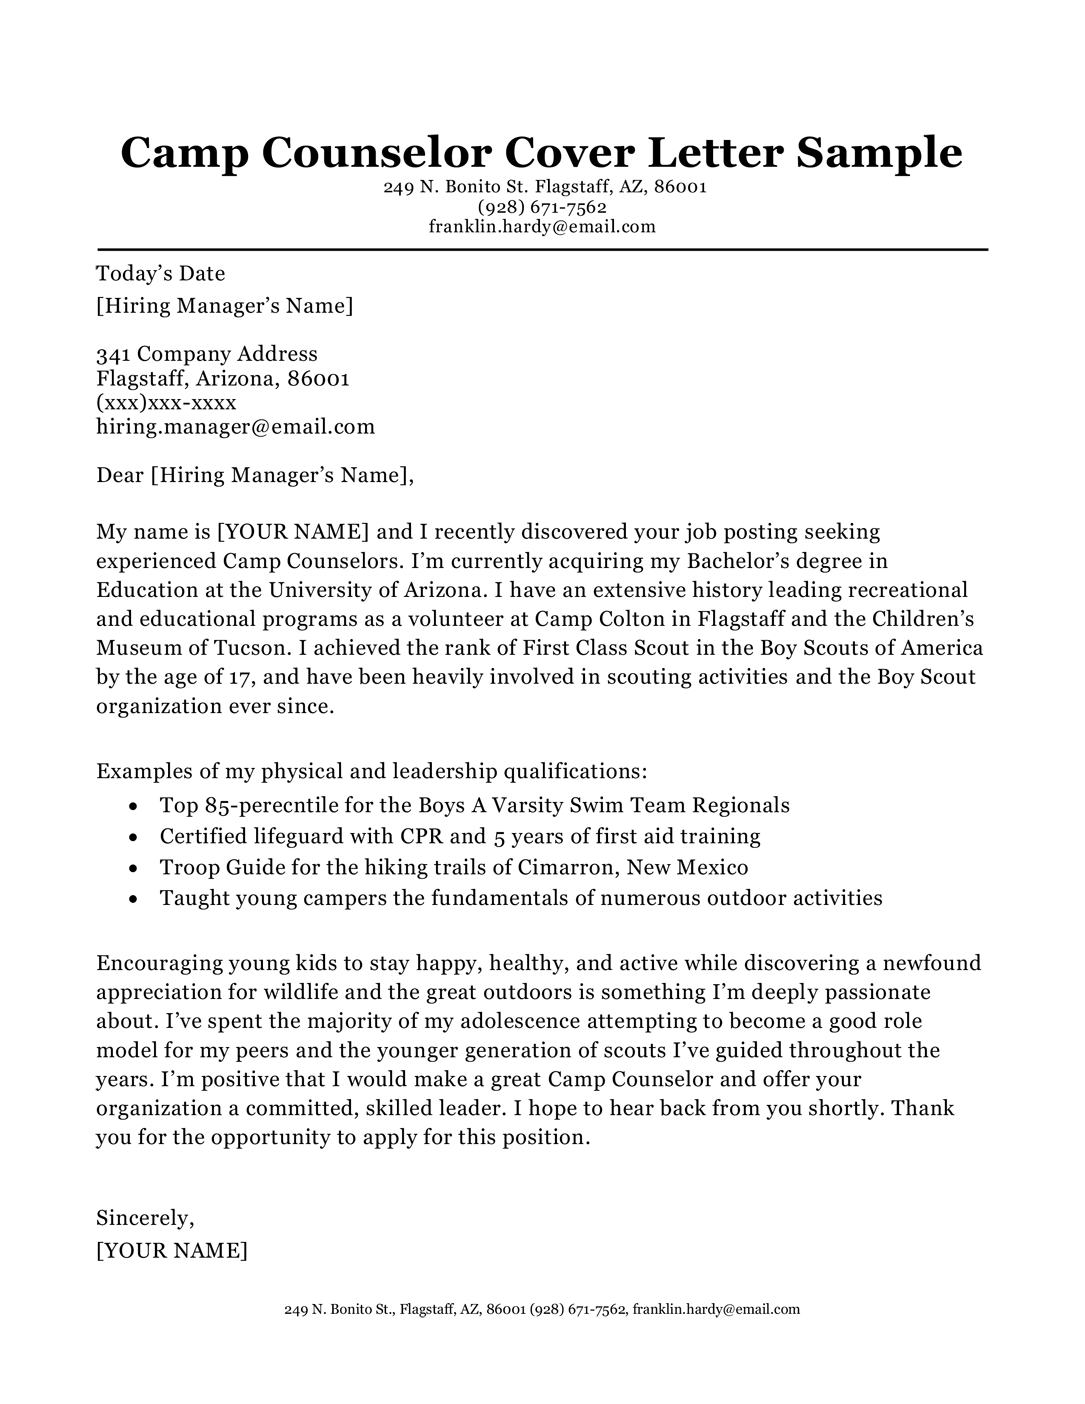 Camp counselor cover letter sample